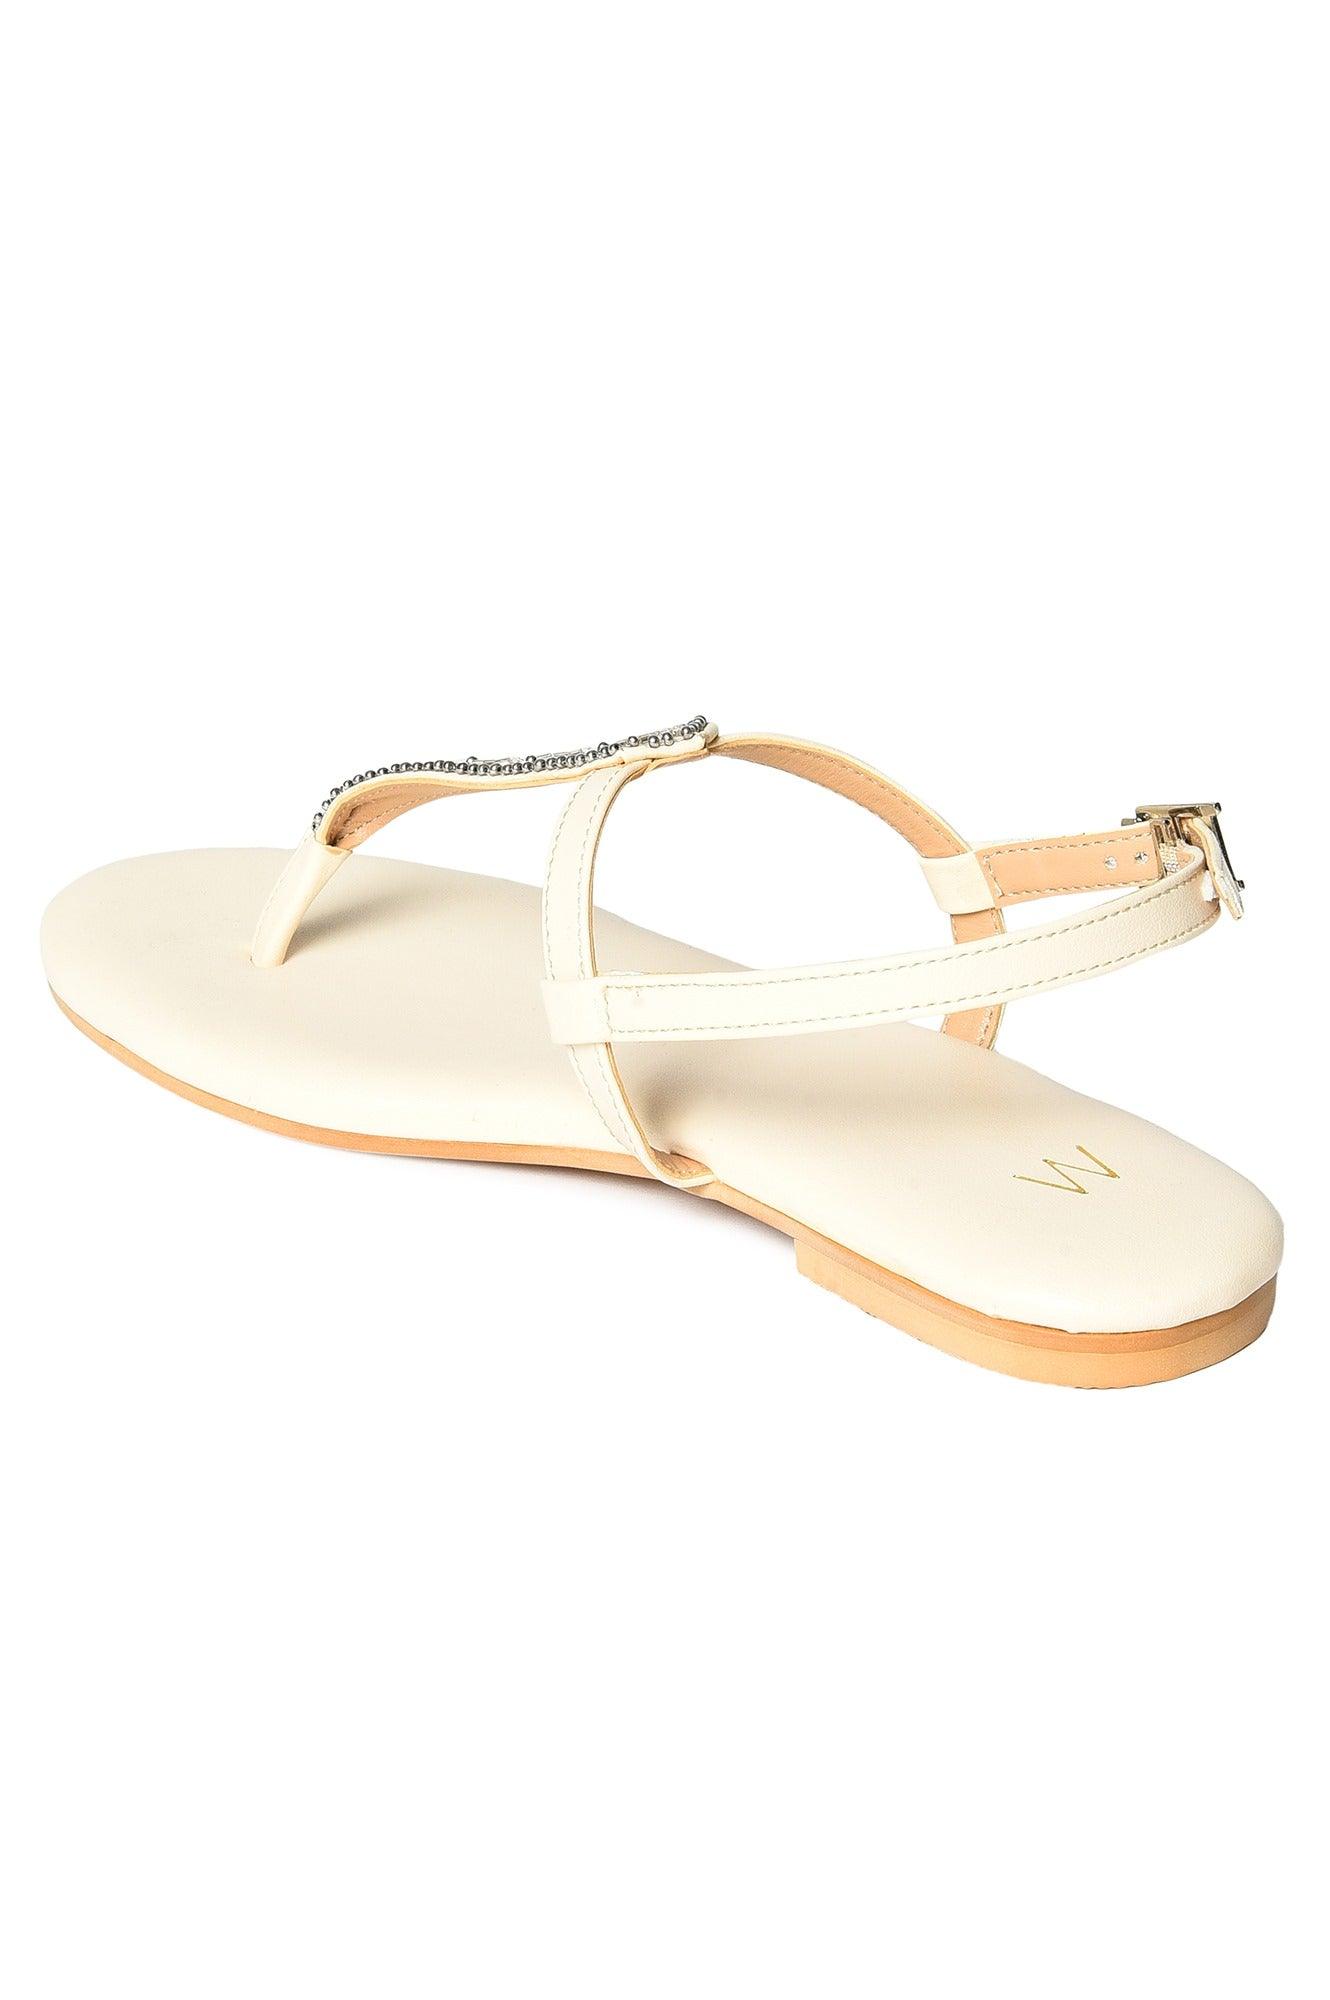 W Off White Embroidered Round Toe Flat - wforwoman